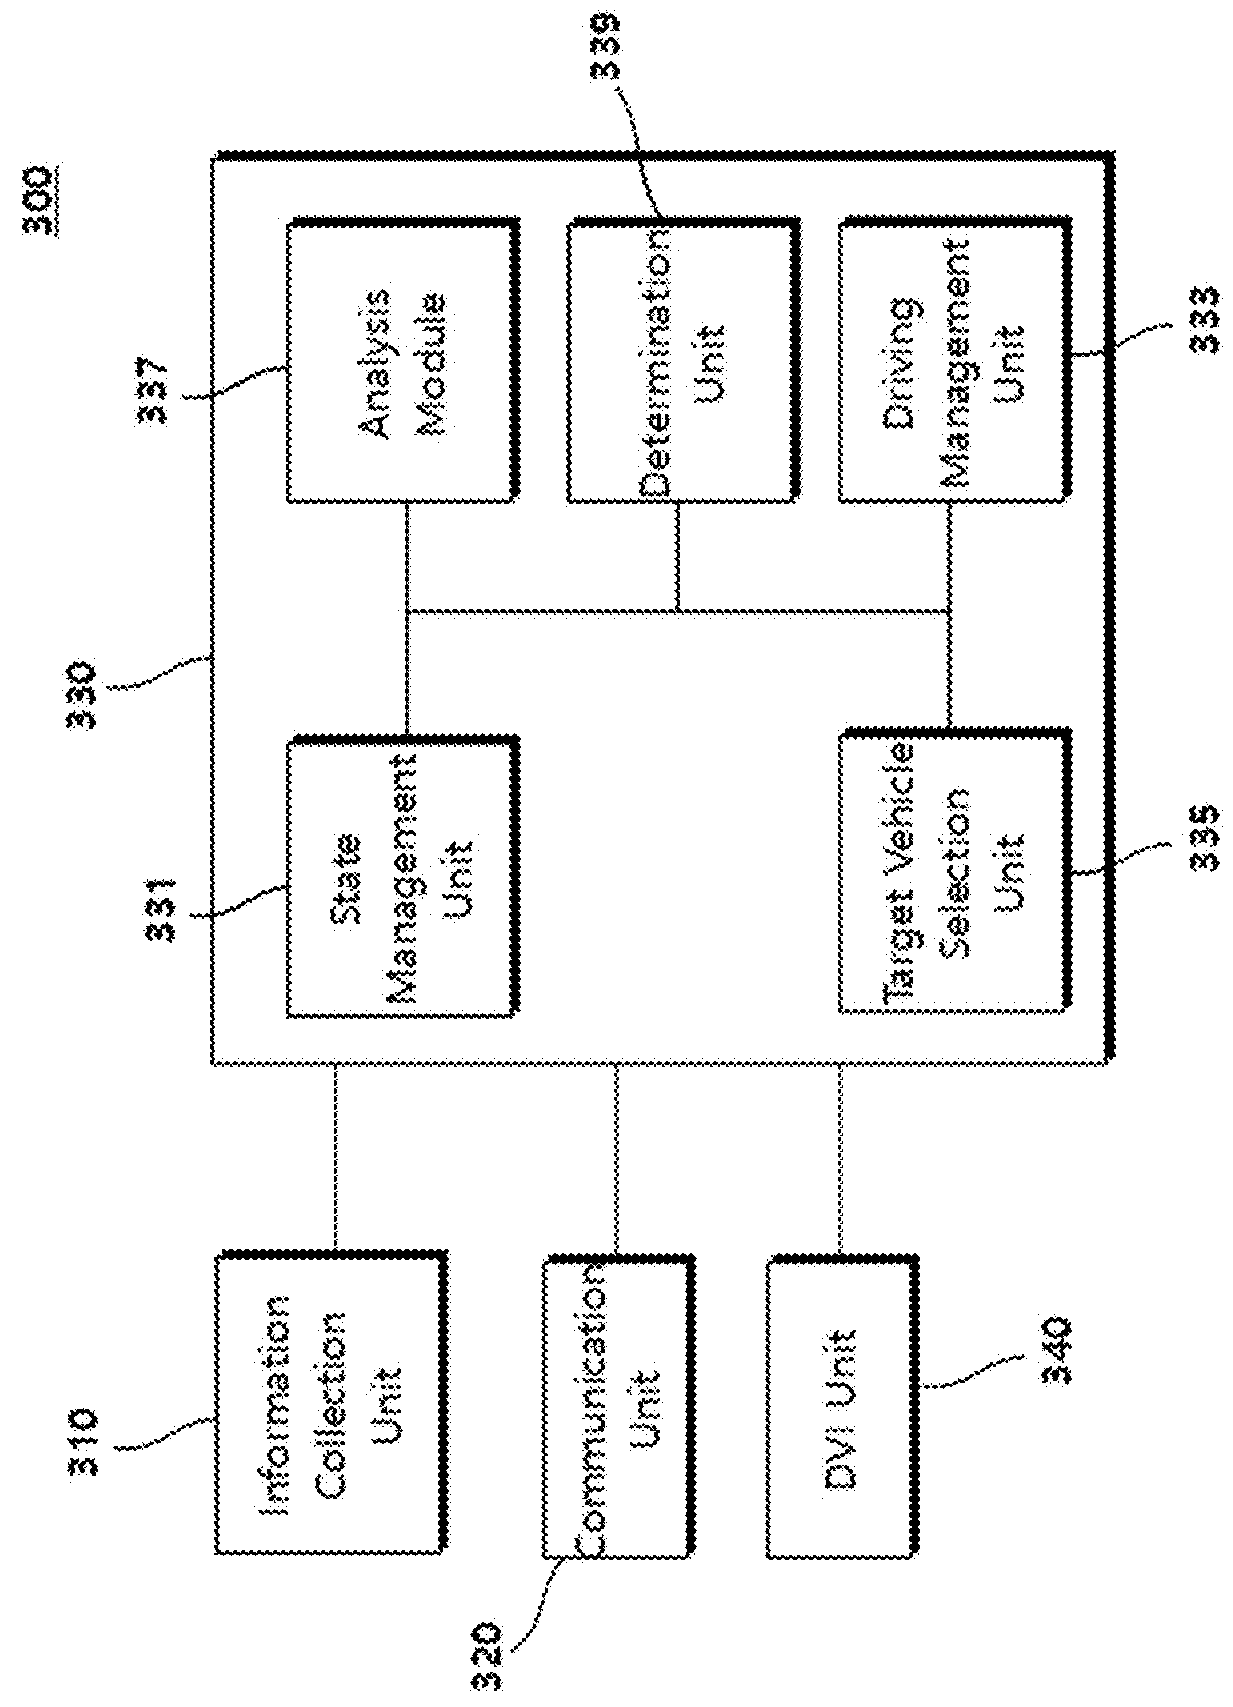 Cooperative adaptive cruise control system based on driving pattern of target vehicle